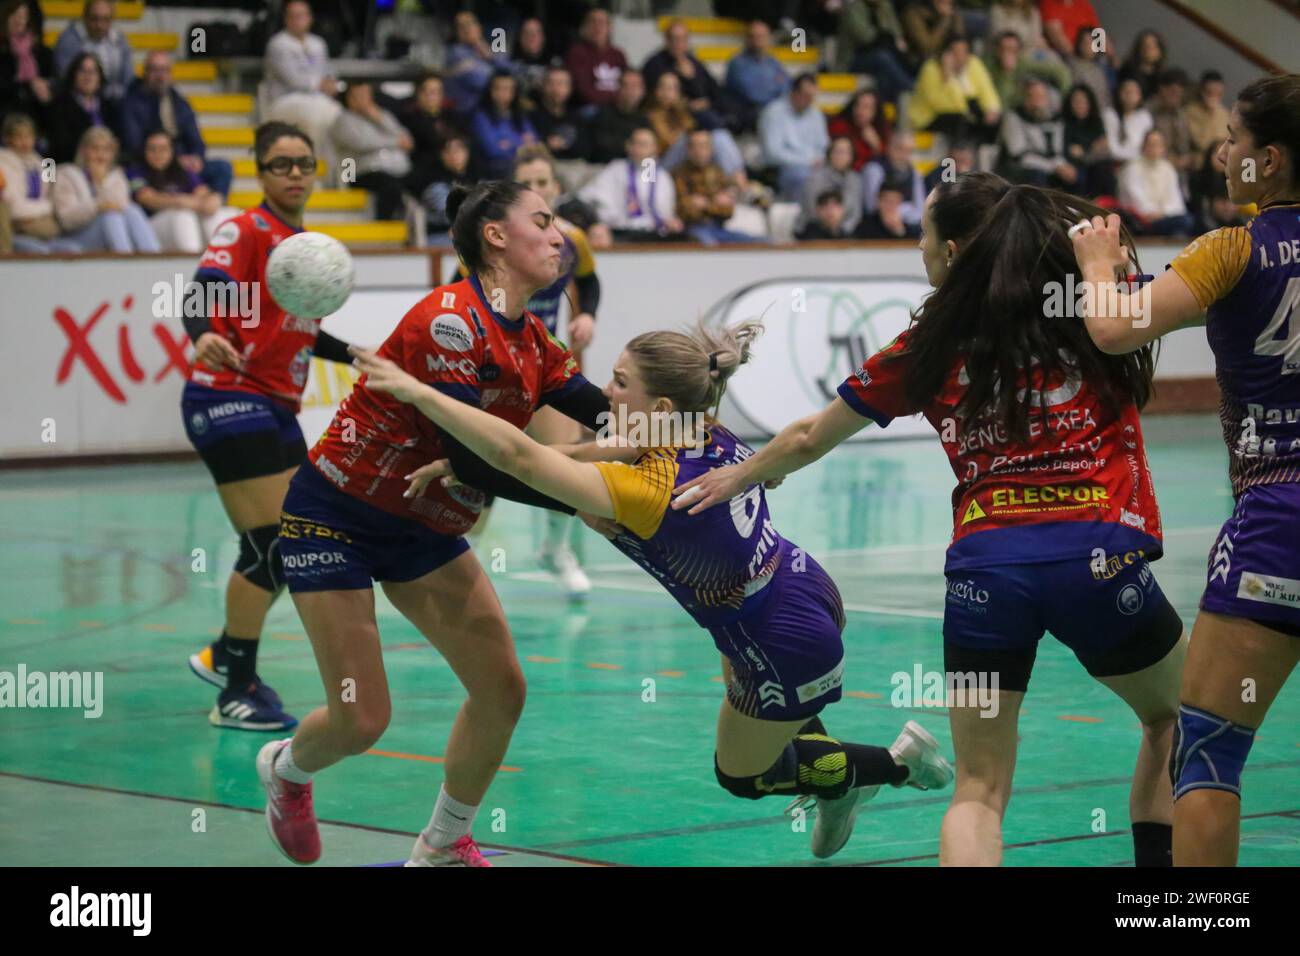 Gijón, Spain, 27th January, 2024: The player of Motive.co Gijón Balonmano La Calzada, Dorottya Margit Zentai (66) shoots on goal during the 15th matchday of the Liga Guerreras Iberdrola 2023-24 between Motive.co Gijón Balonmano La Calzada and Conserbas Orbe Rubensa BM. Porriño, on January 27, 2024, at the Arena Pavilion, in Gijón, Spain. Credit: Alberto Brevers / Alamy Live News. Stock Photo